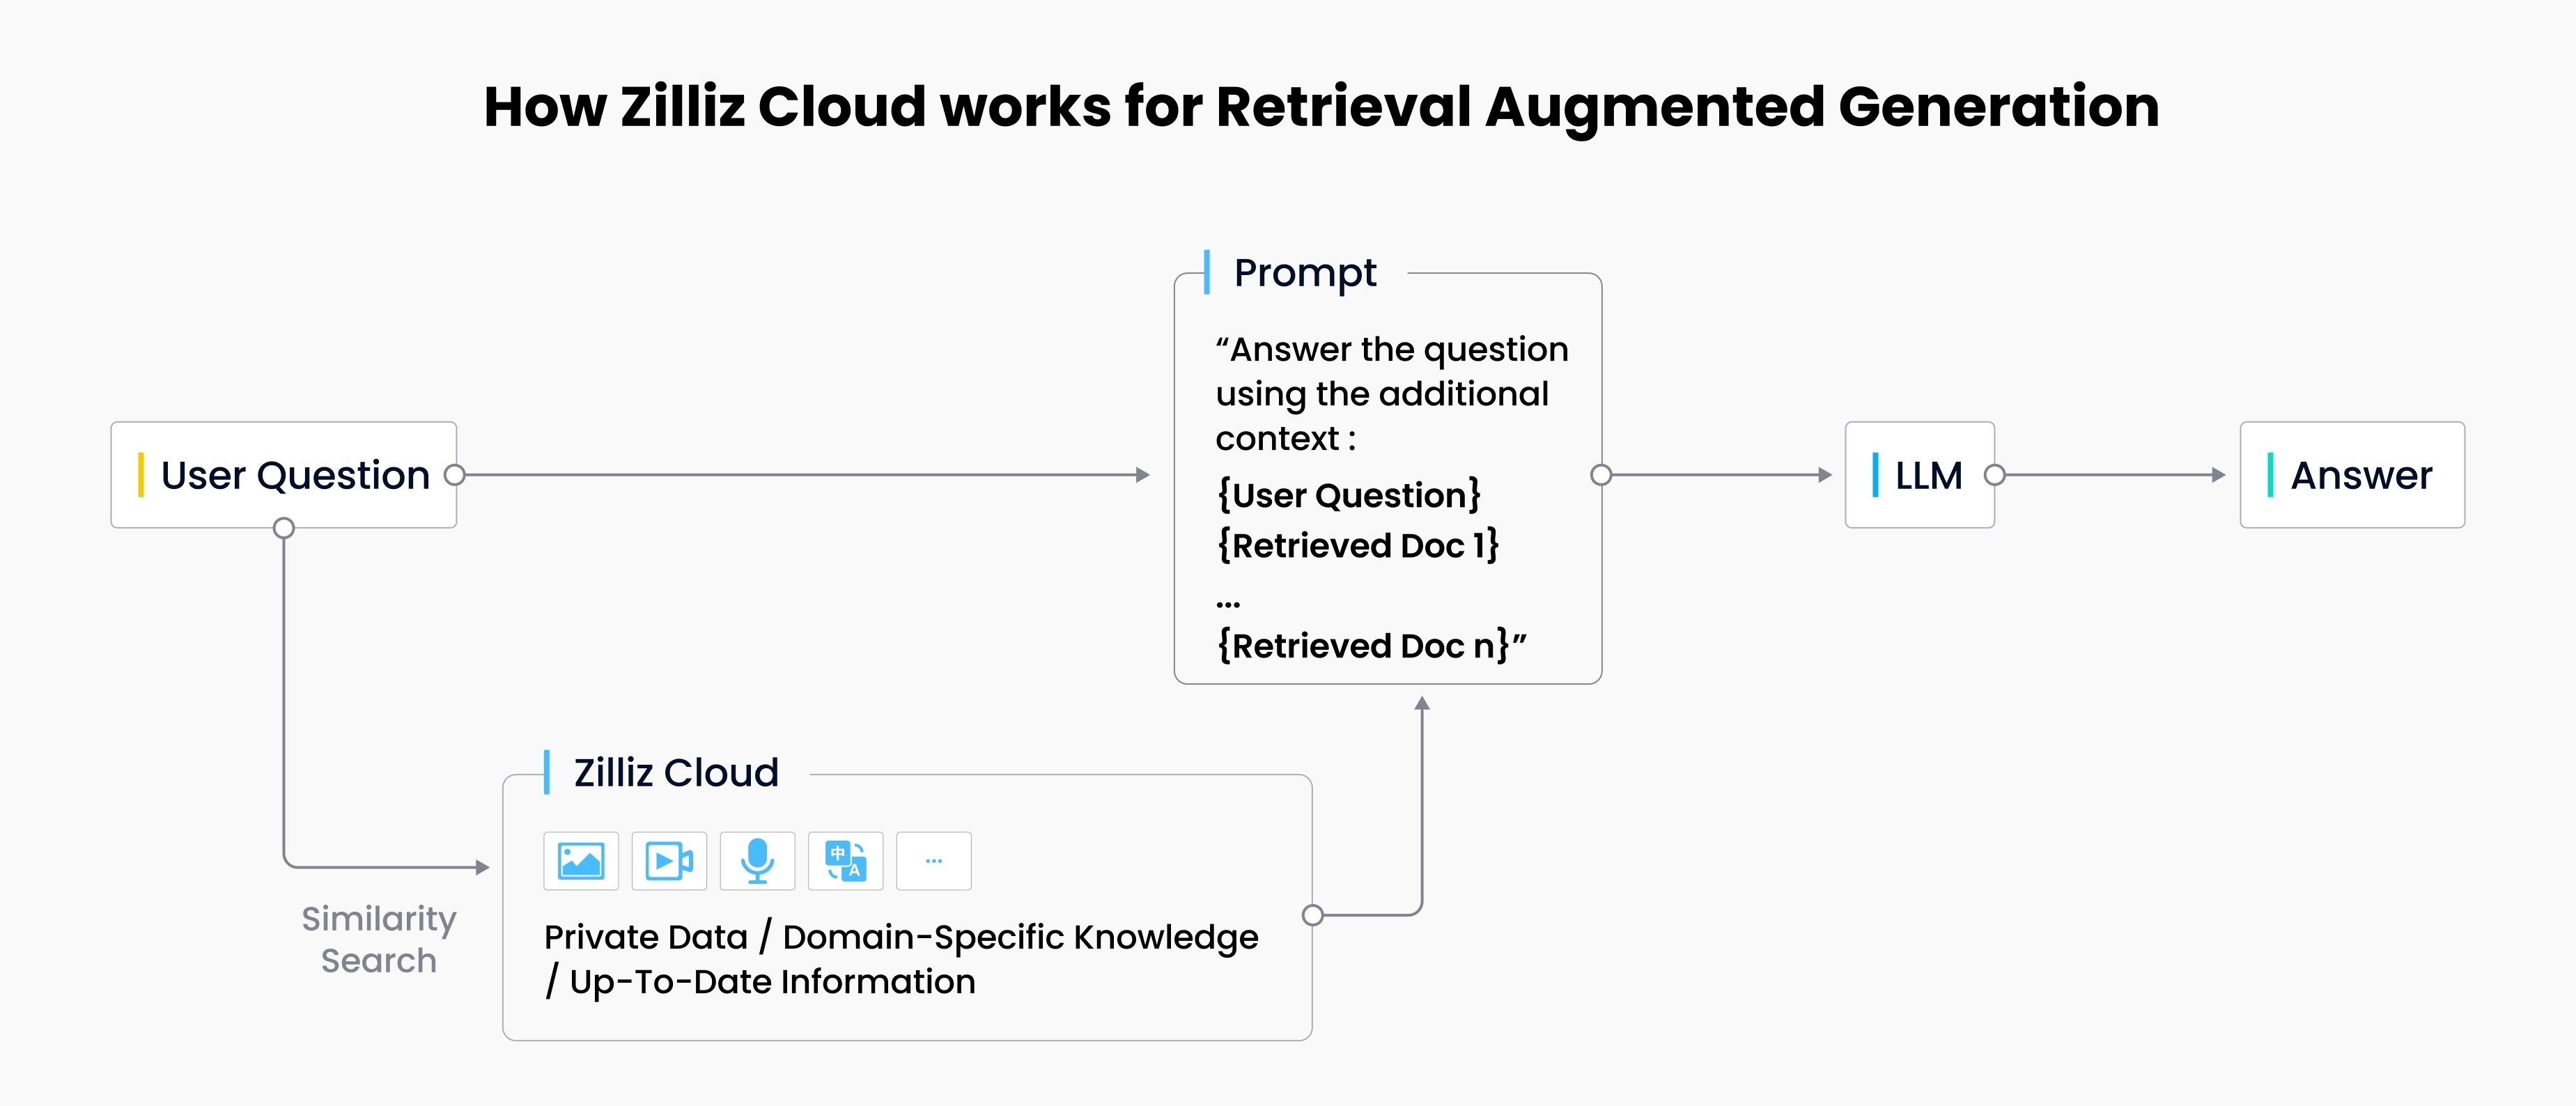 How Zilliz Cloud works for Retrieval Augmented Generation